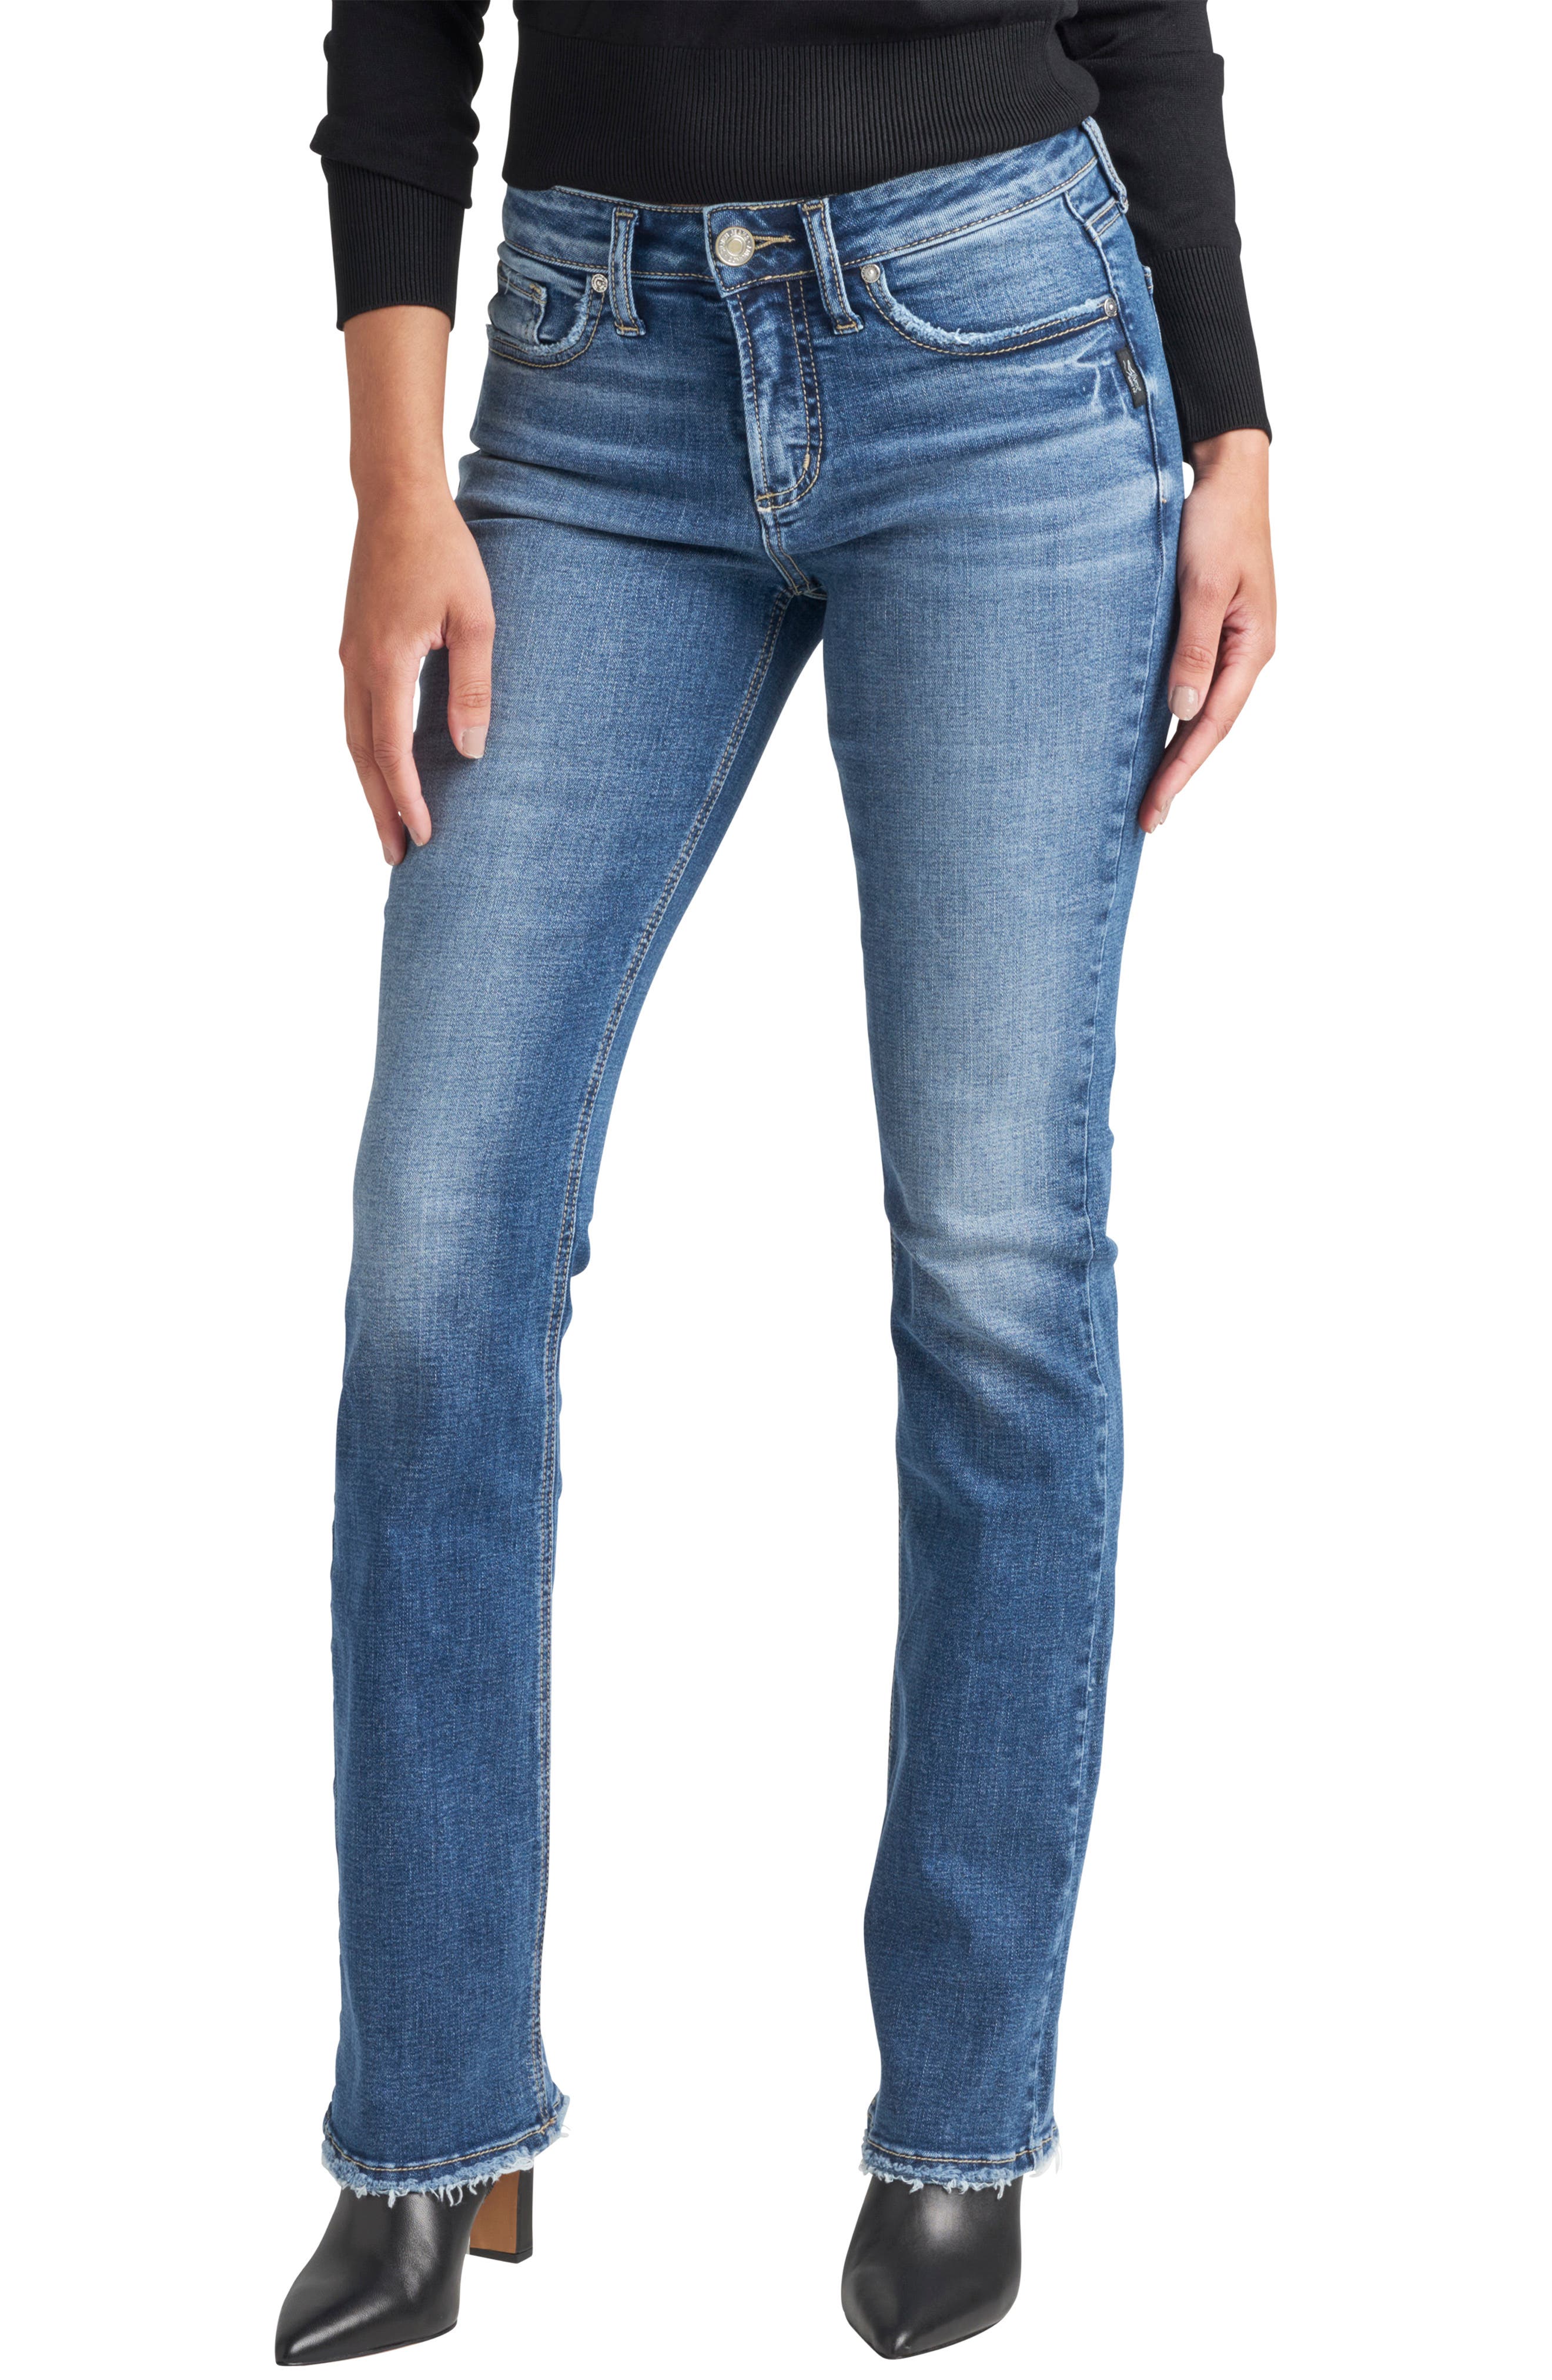 Silver Jeans Co. Suki Slim Fit Bootcut Jeans in Indigo